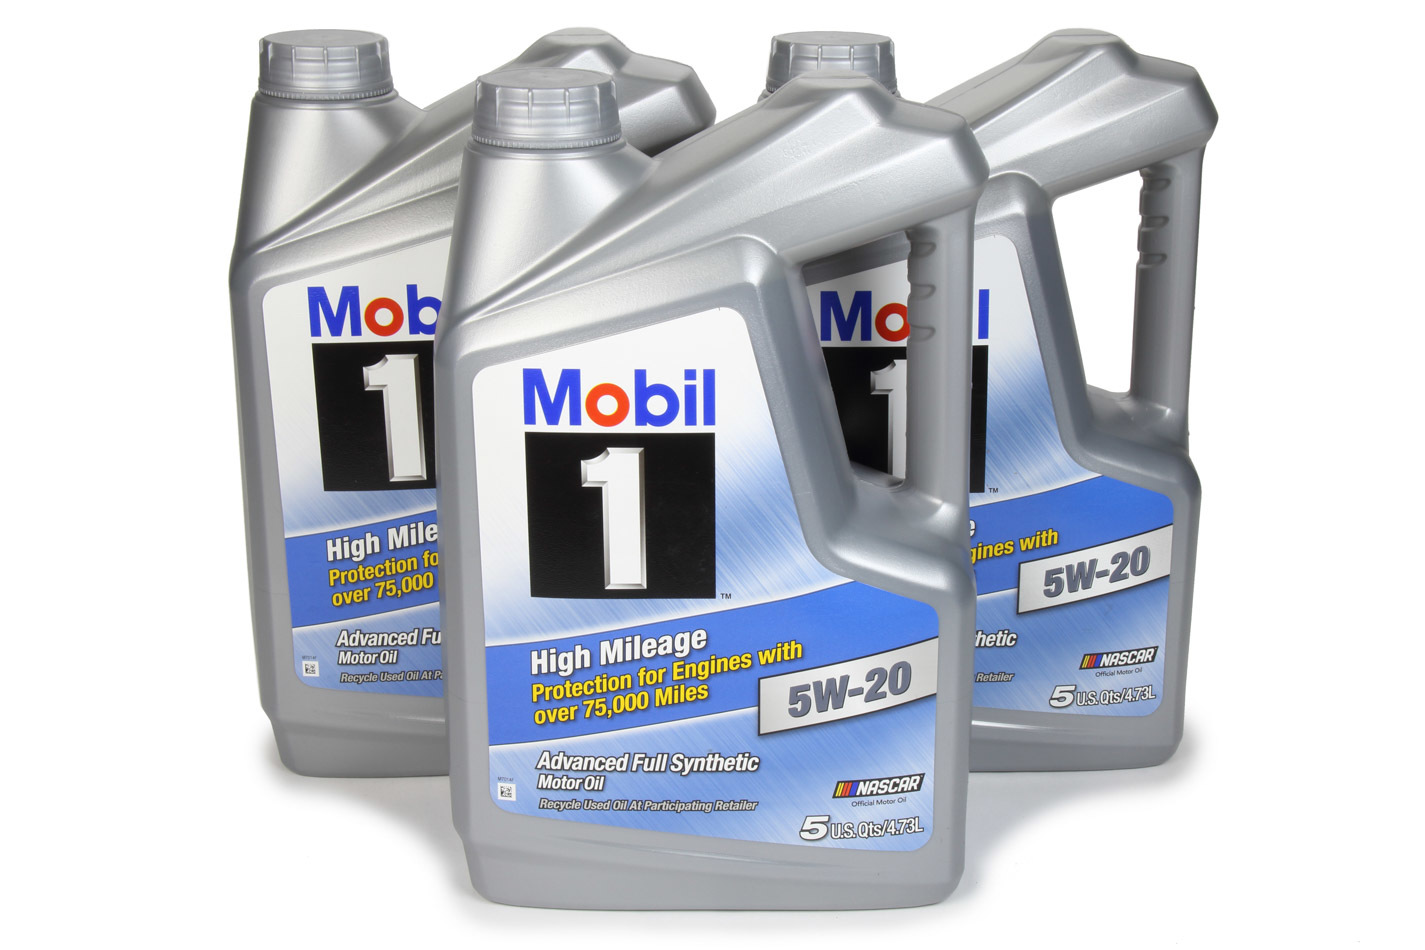 MOBIL 1 Motor Oil High Mileage 5W20 Synthetic 5 qt Jug Set of 3